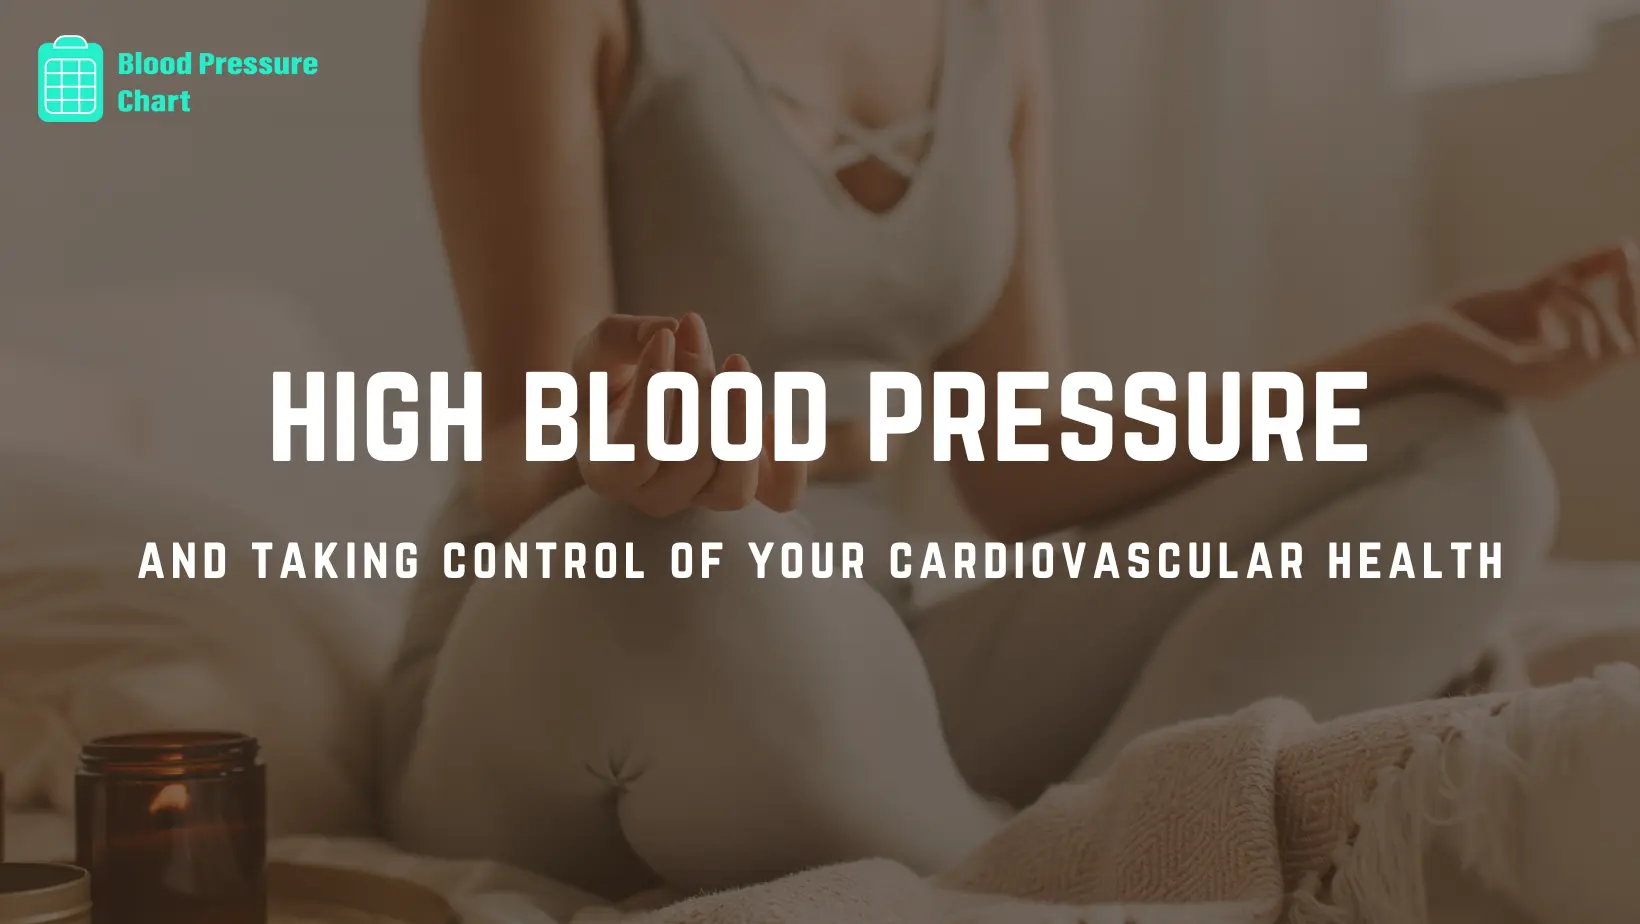 High Blood Pressure Chart: Visual guide to elevated blood pressure levels.